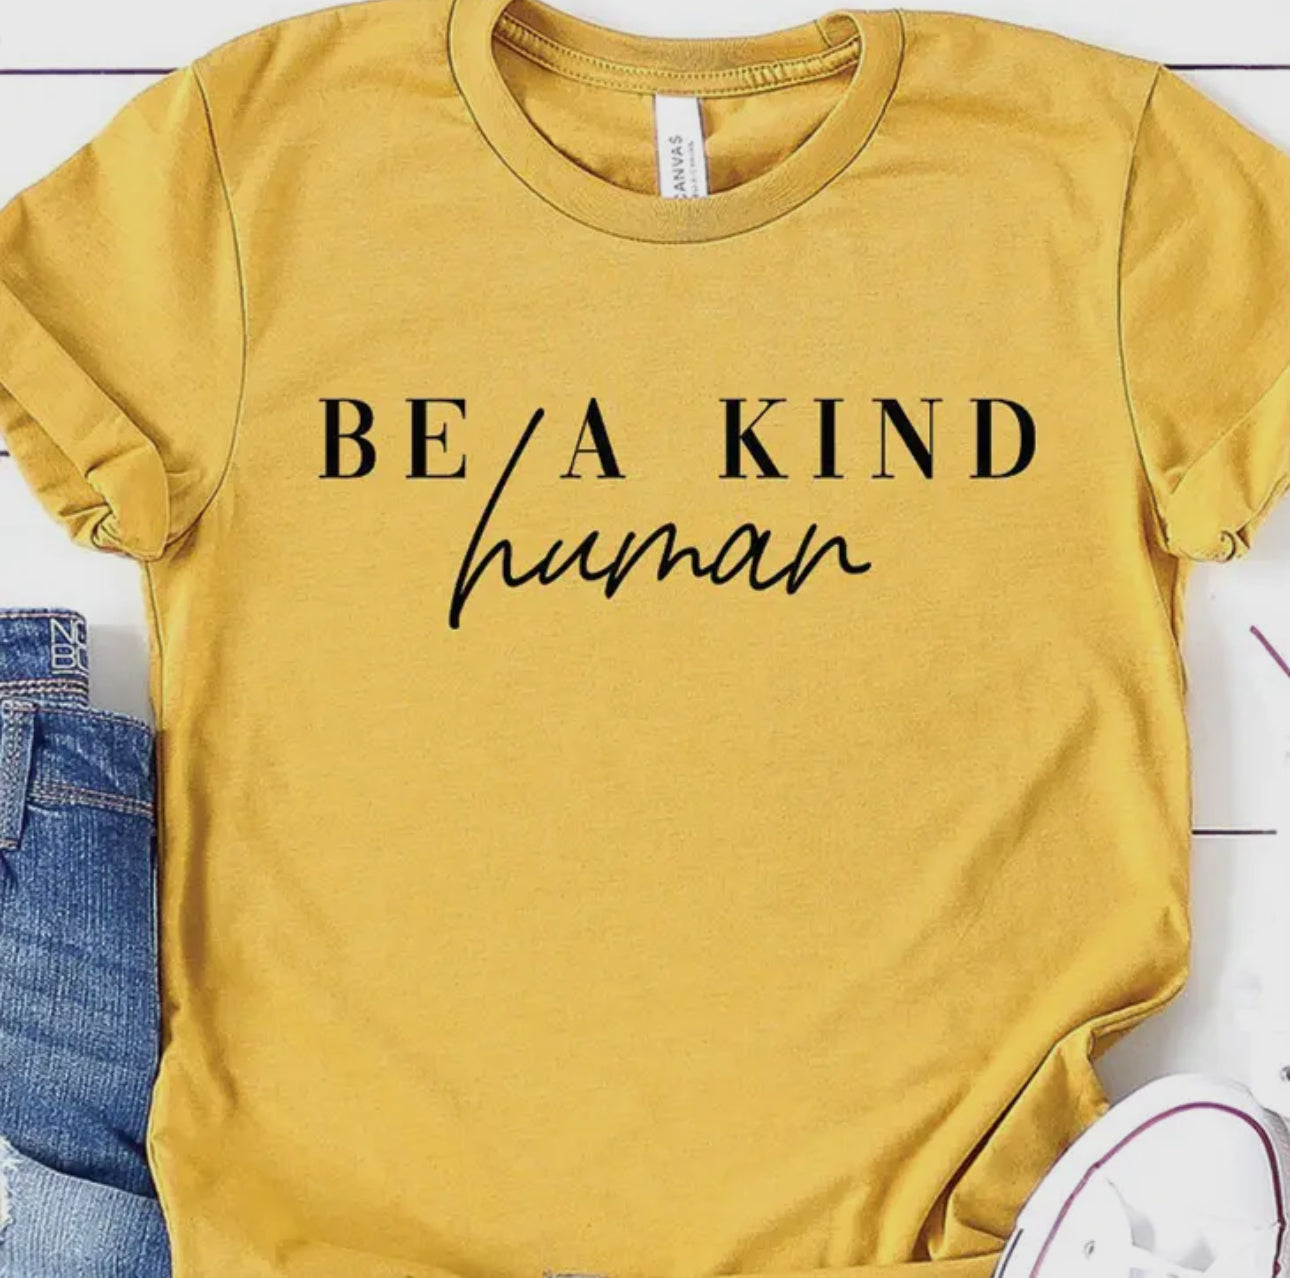 Be a kind human graphic tee